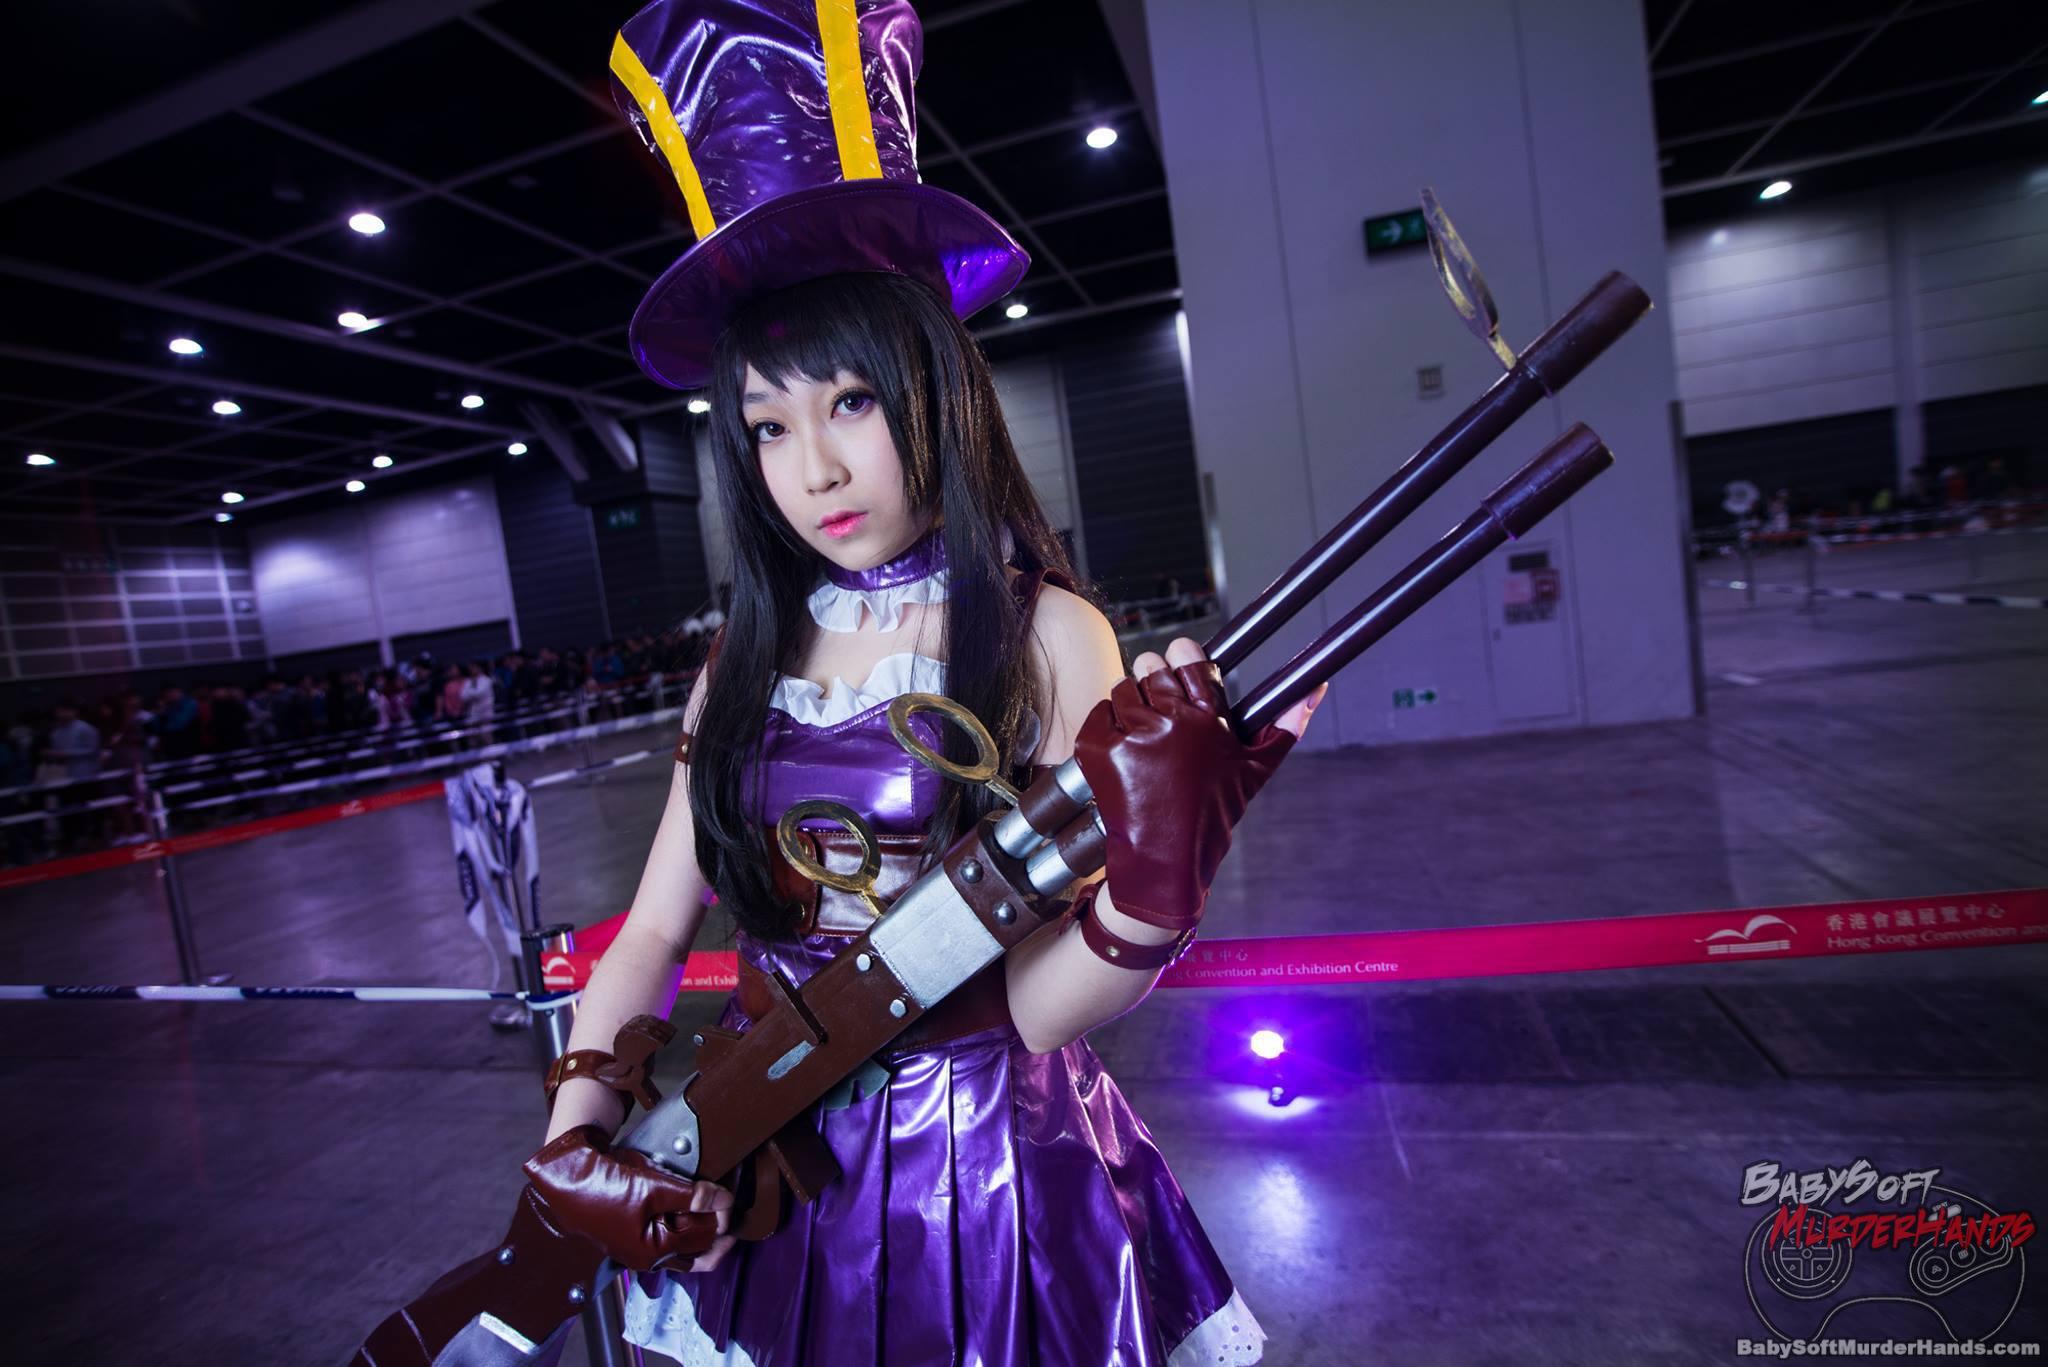 ariachan (筱原幽)  Caitlyn  of League of Legends Cosplay